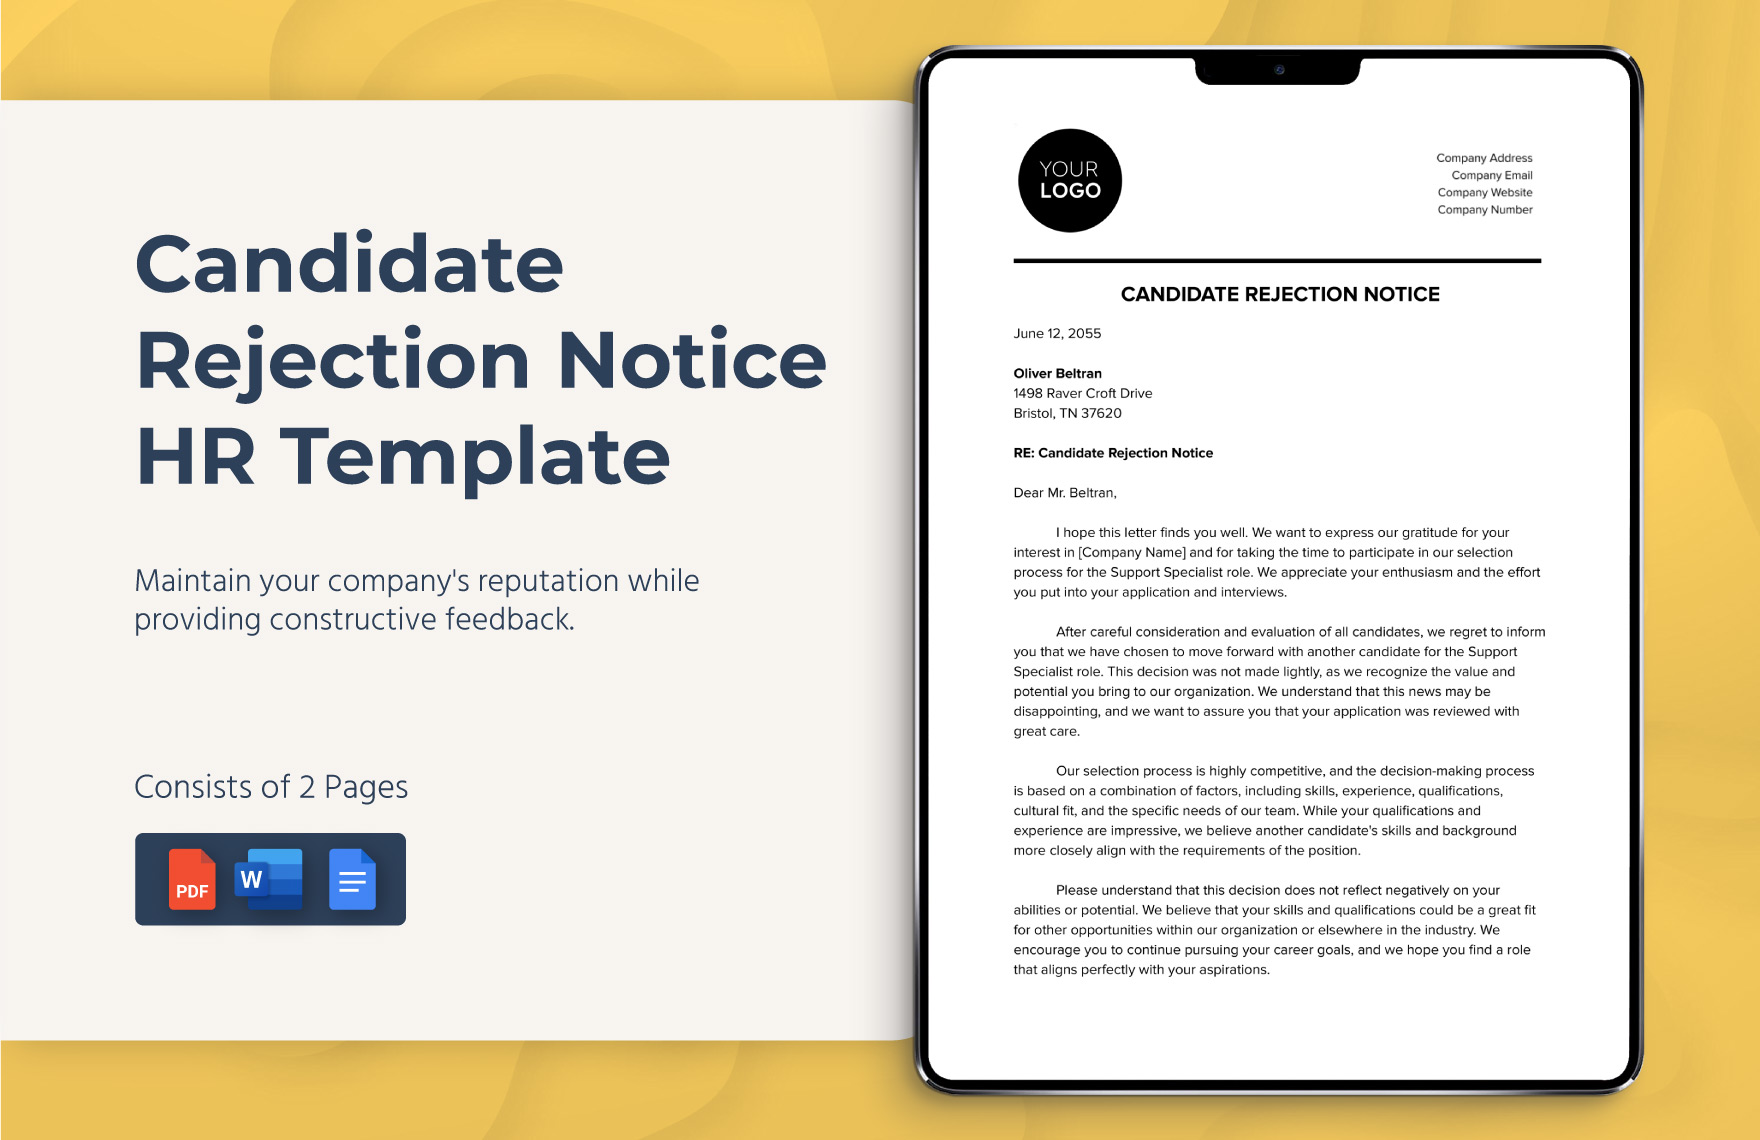 Candidate Rejection Notice HR Template in Word, Google Docs, PDF